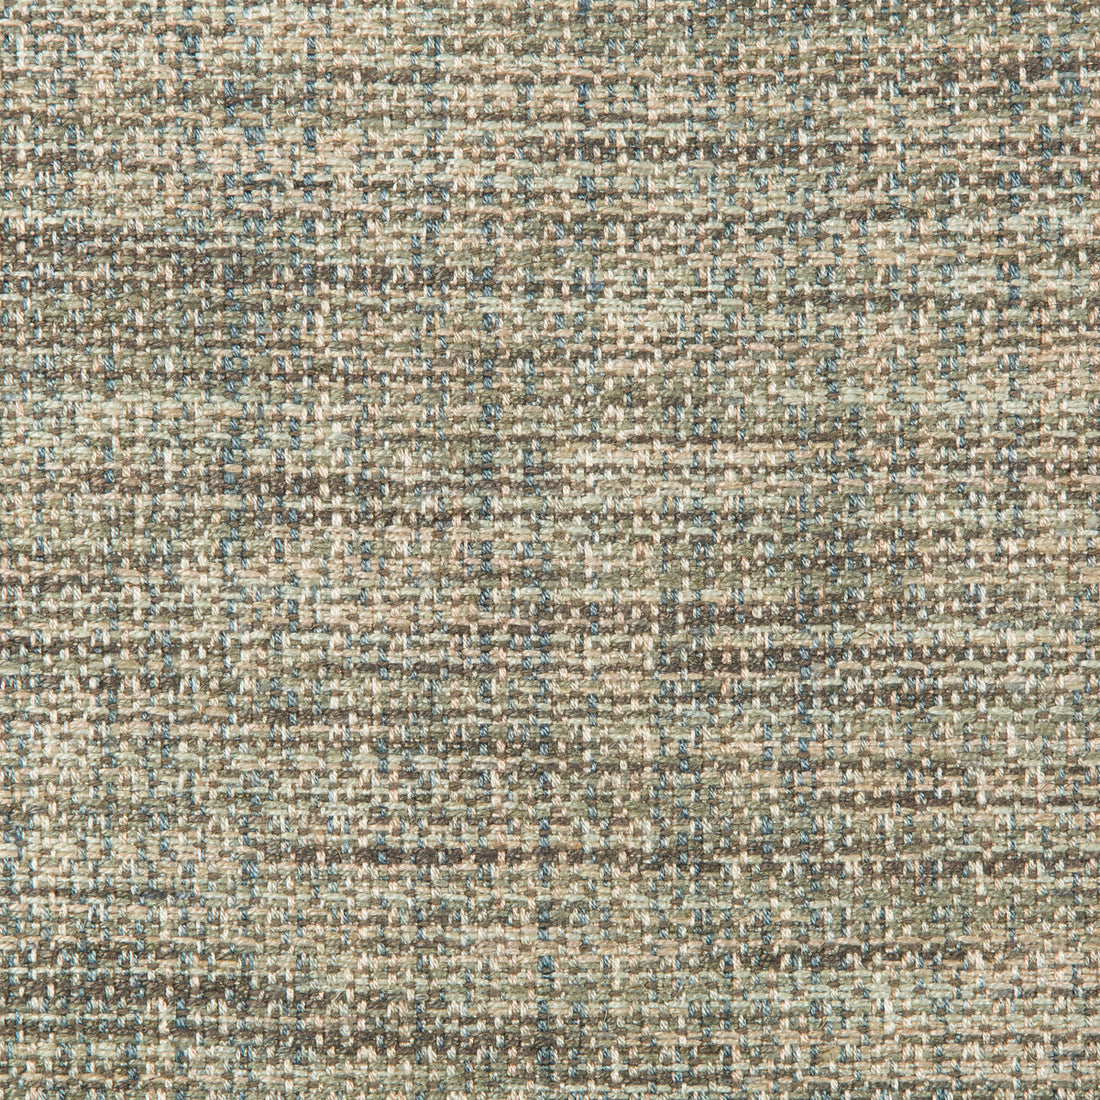 Ladera fabric in fog color - pattern 35523.516.0 - by Kravet Design in the Barclay Butera Sagamore collection